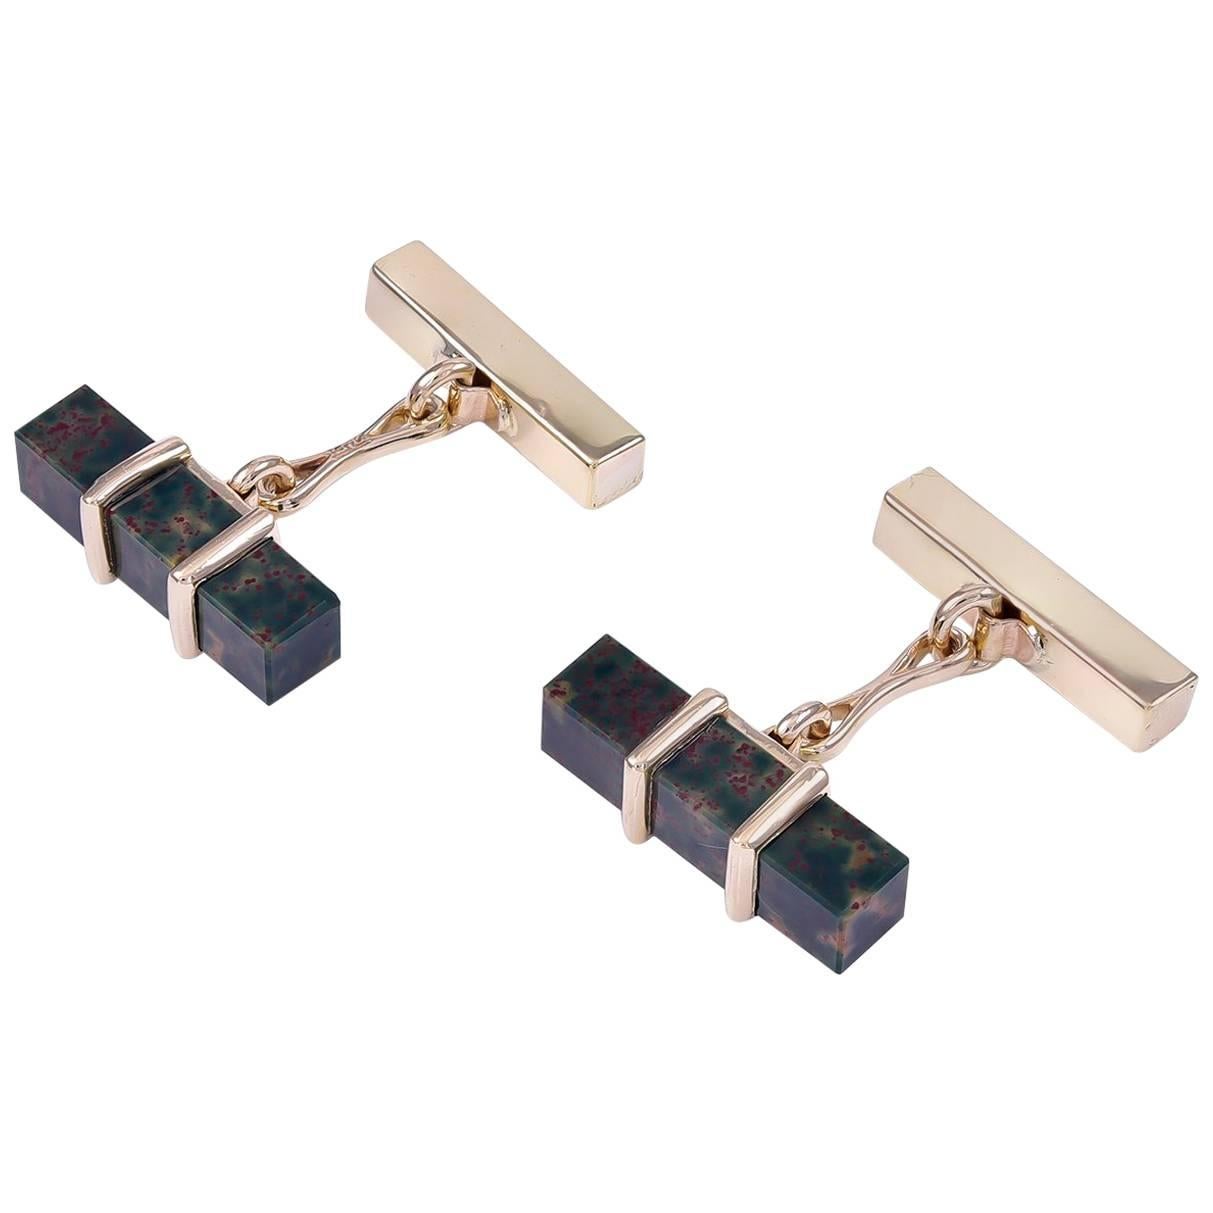 Gold and Bloodstone Tiffany & Co. Cufflinks